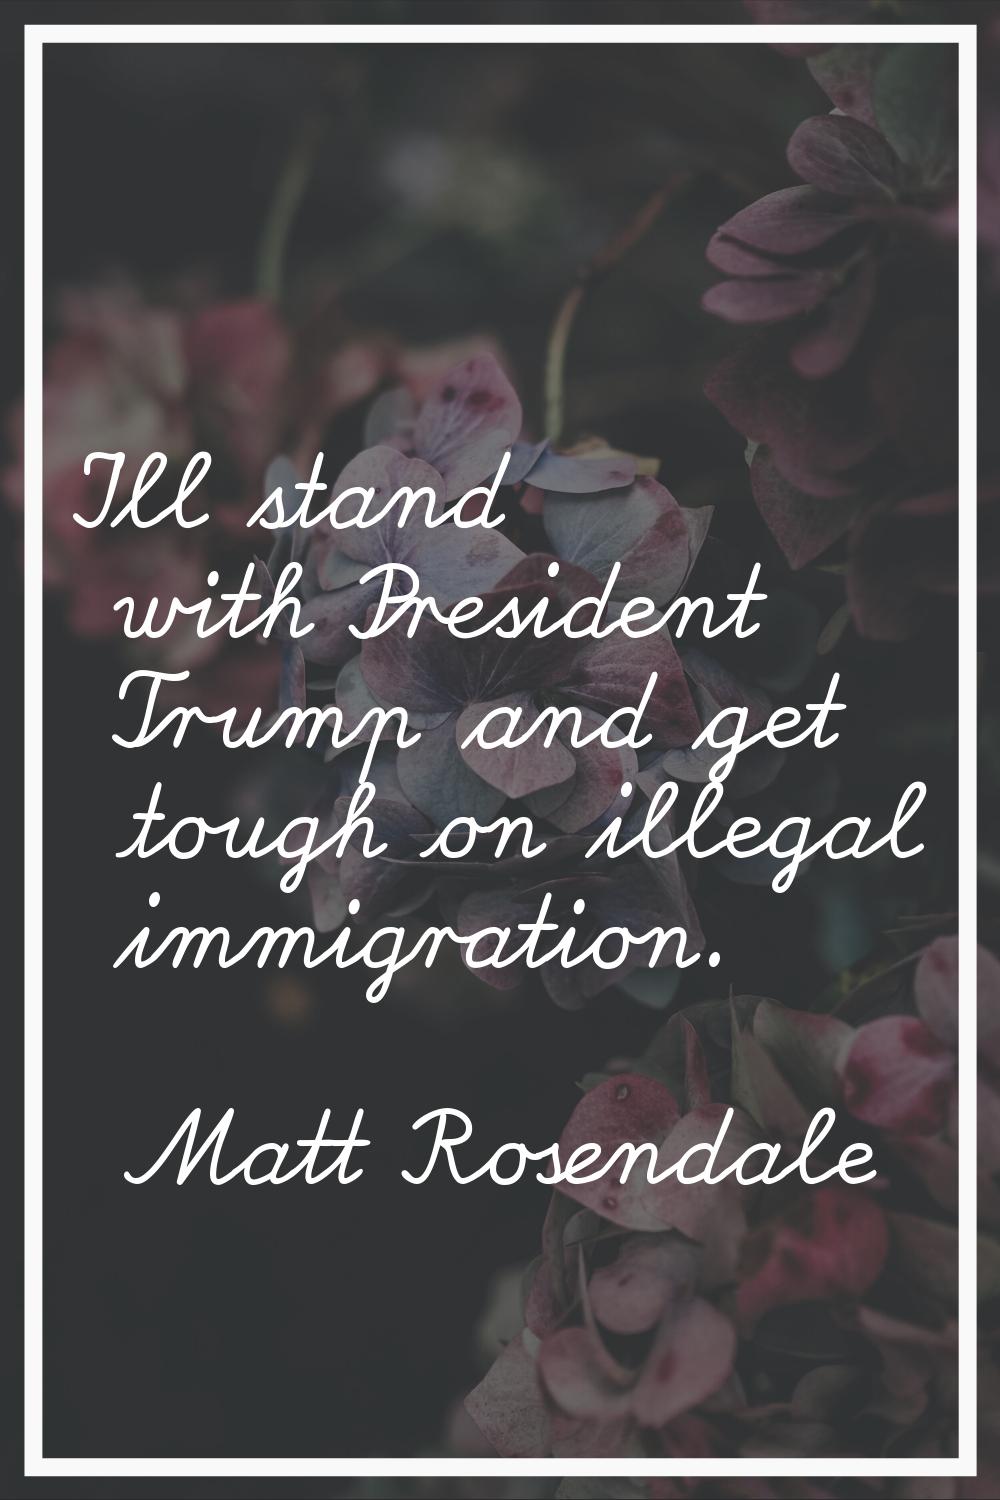 I'll stand with President Trump and get tough on illegal immigration.